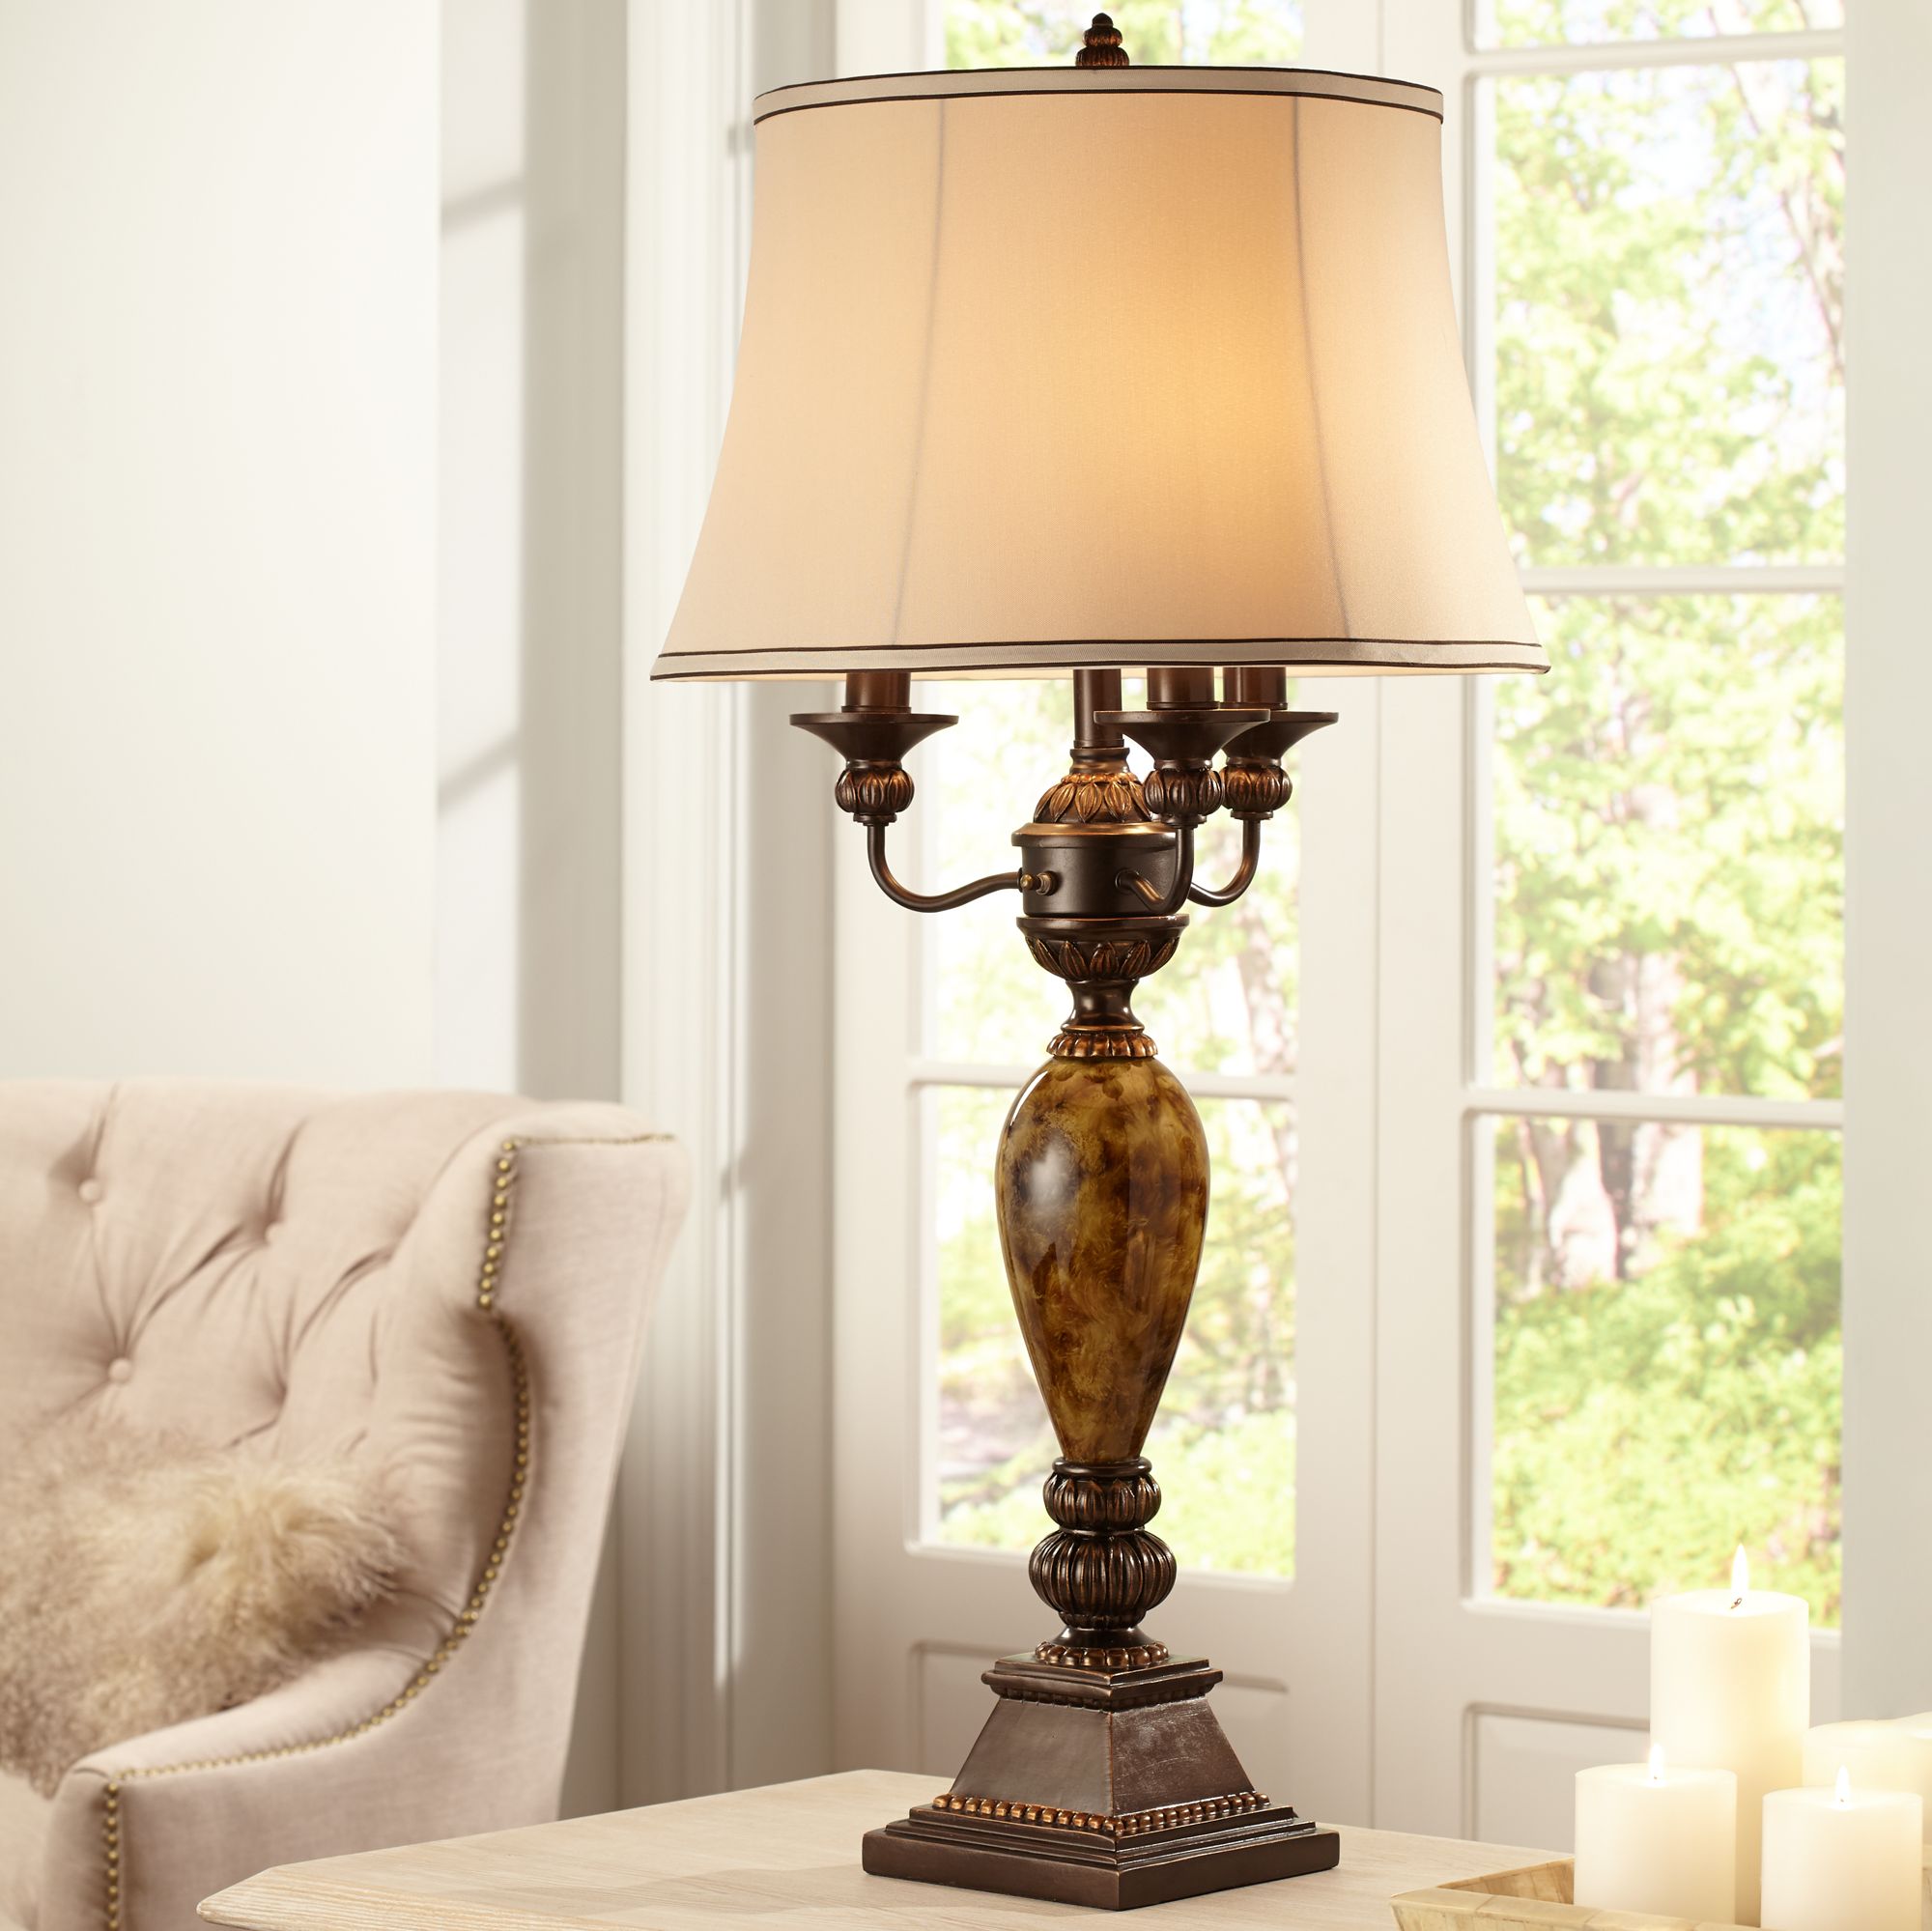 Tall Table Lamps - Large Designs, 36 